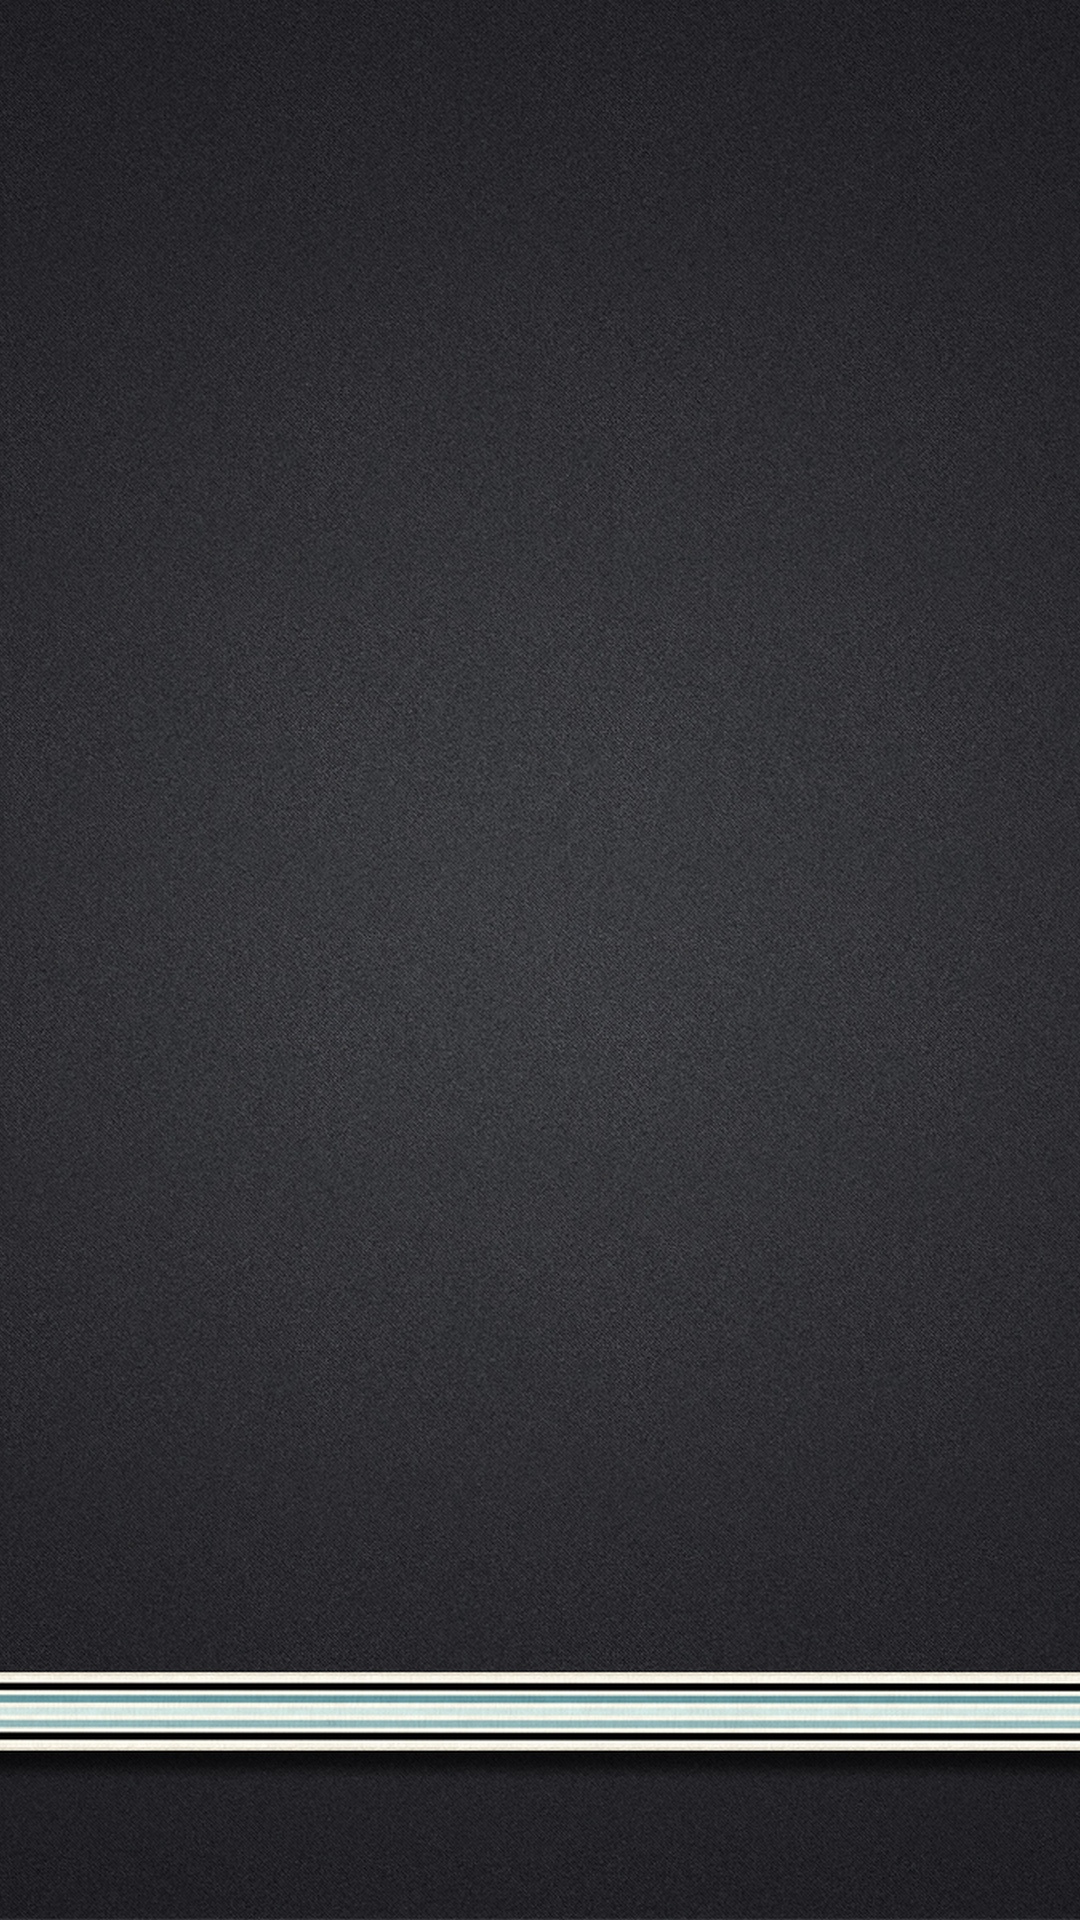 Galaxy s4 background with simple gray texture design 1080x1920